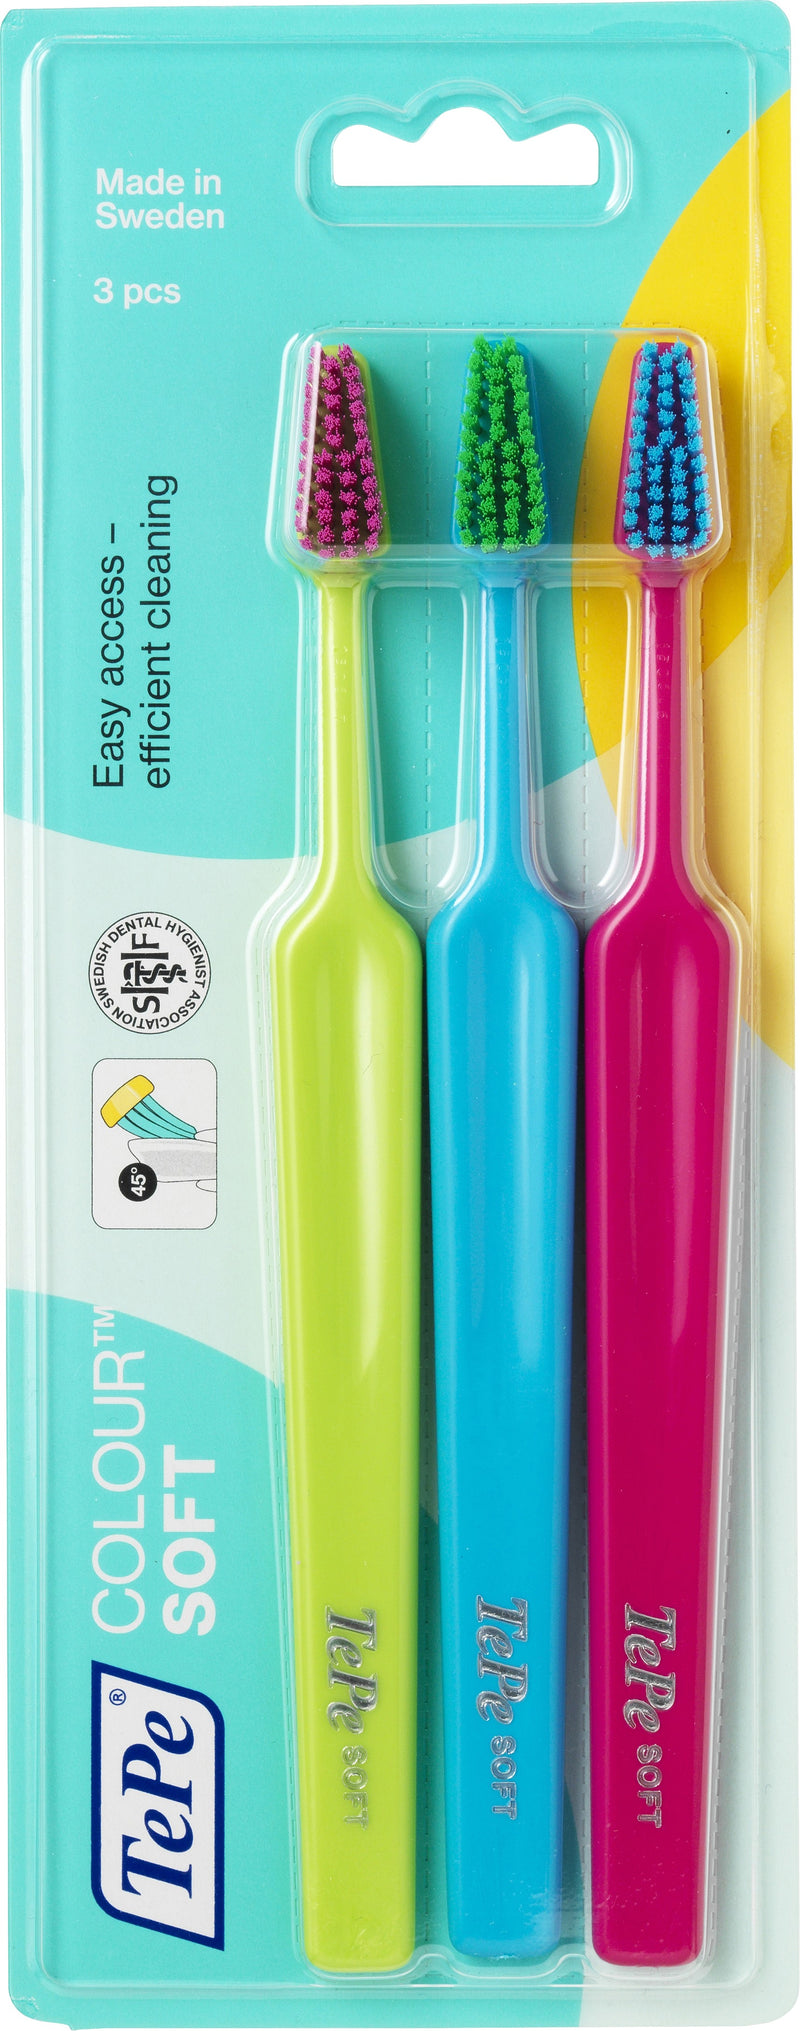 TePe Select Colour Soft Toothbrush Three Toothbrushes - 1x Cello Pack